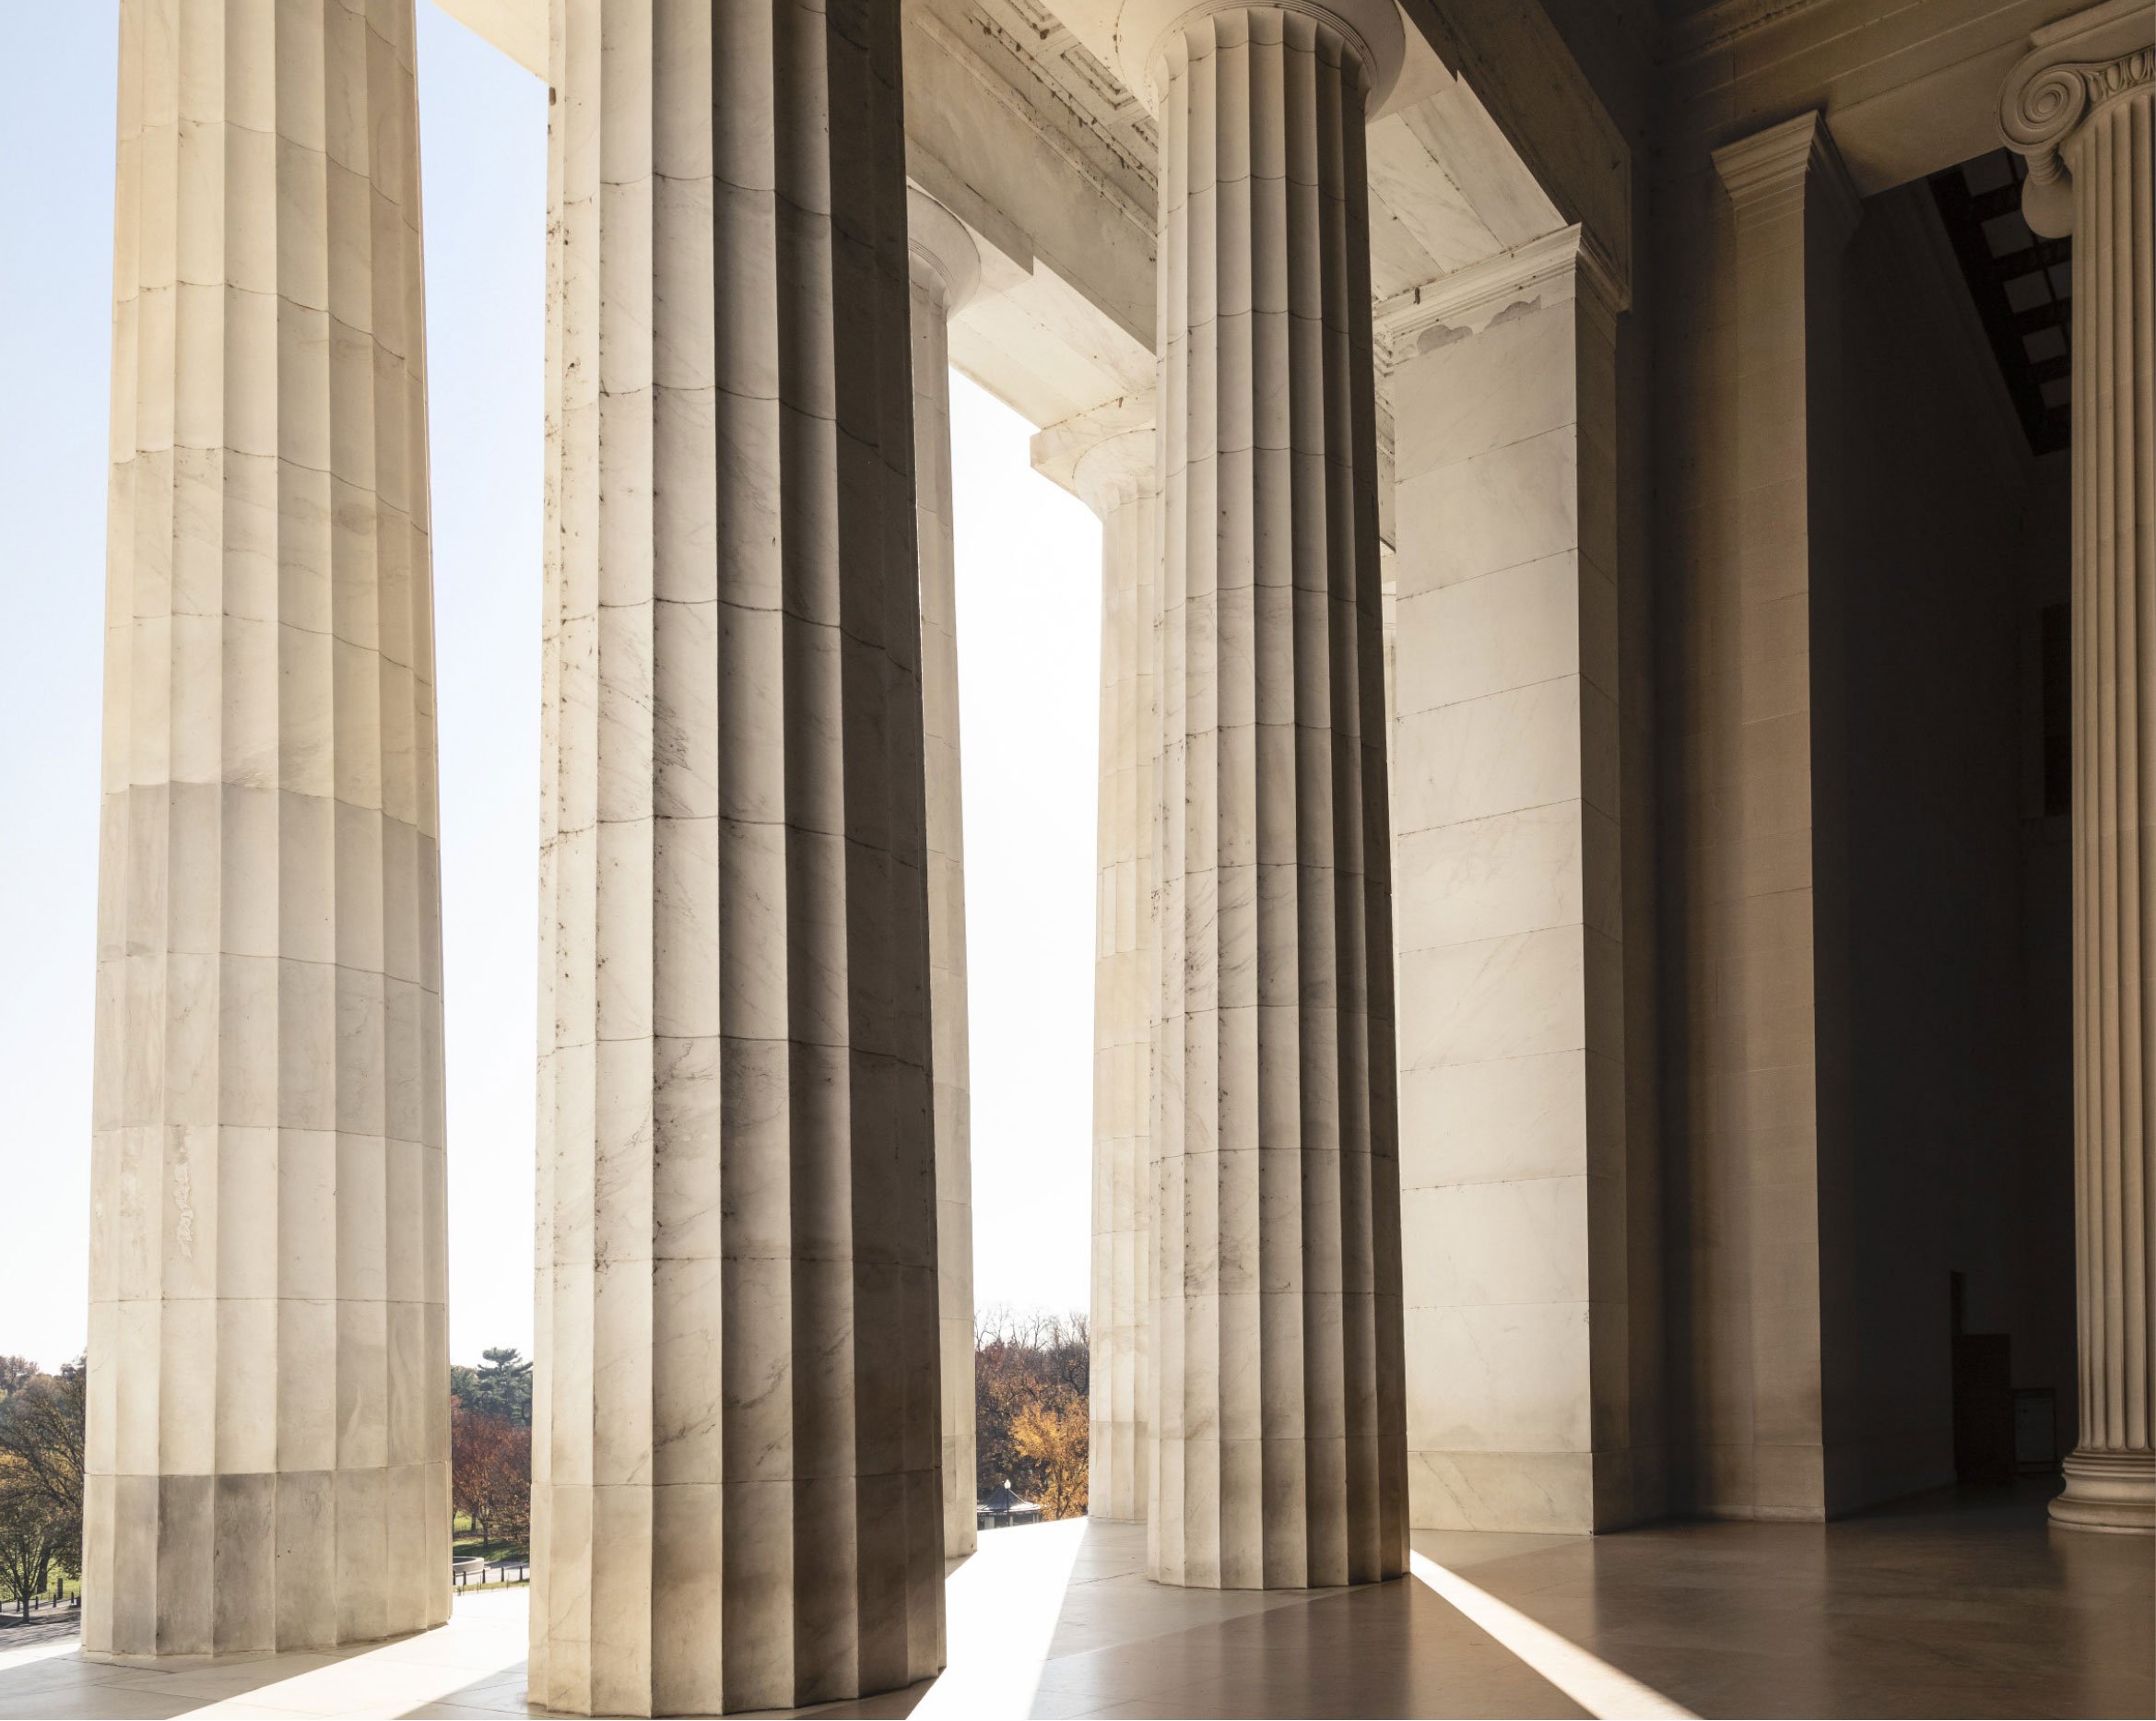 The steps of the Lincoln Memorial has been home to many defining moments in American history.